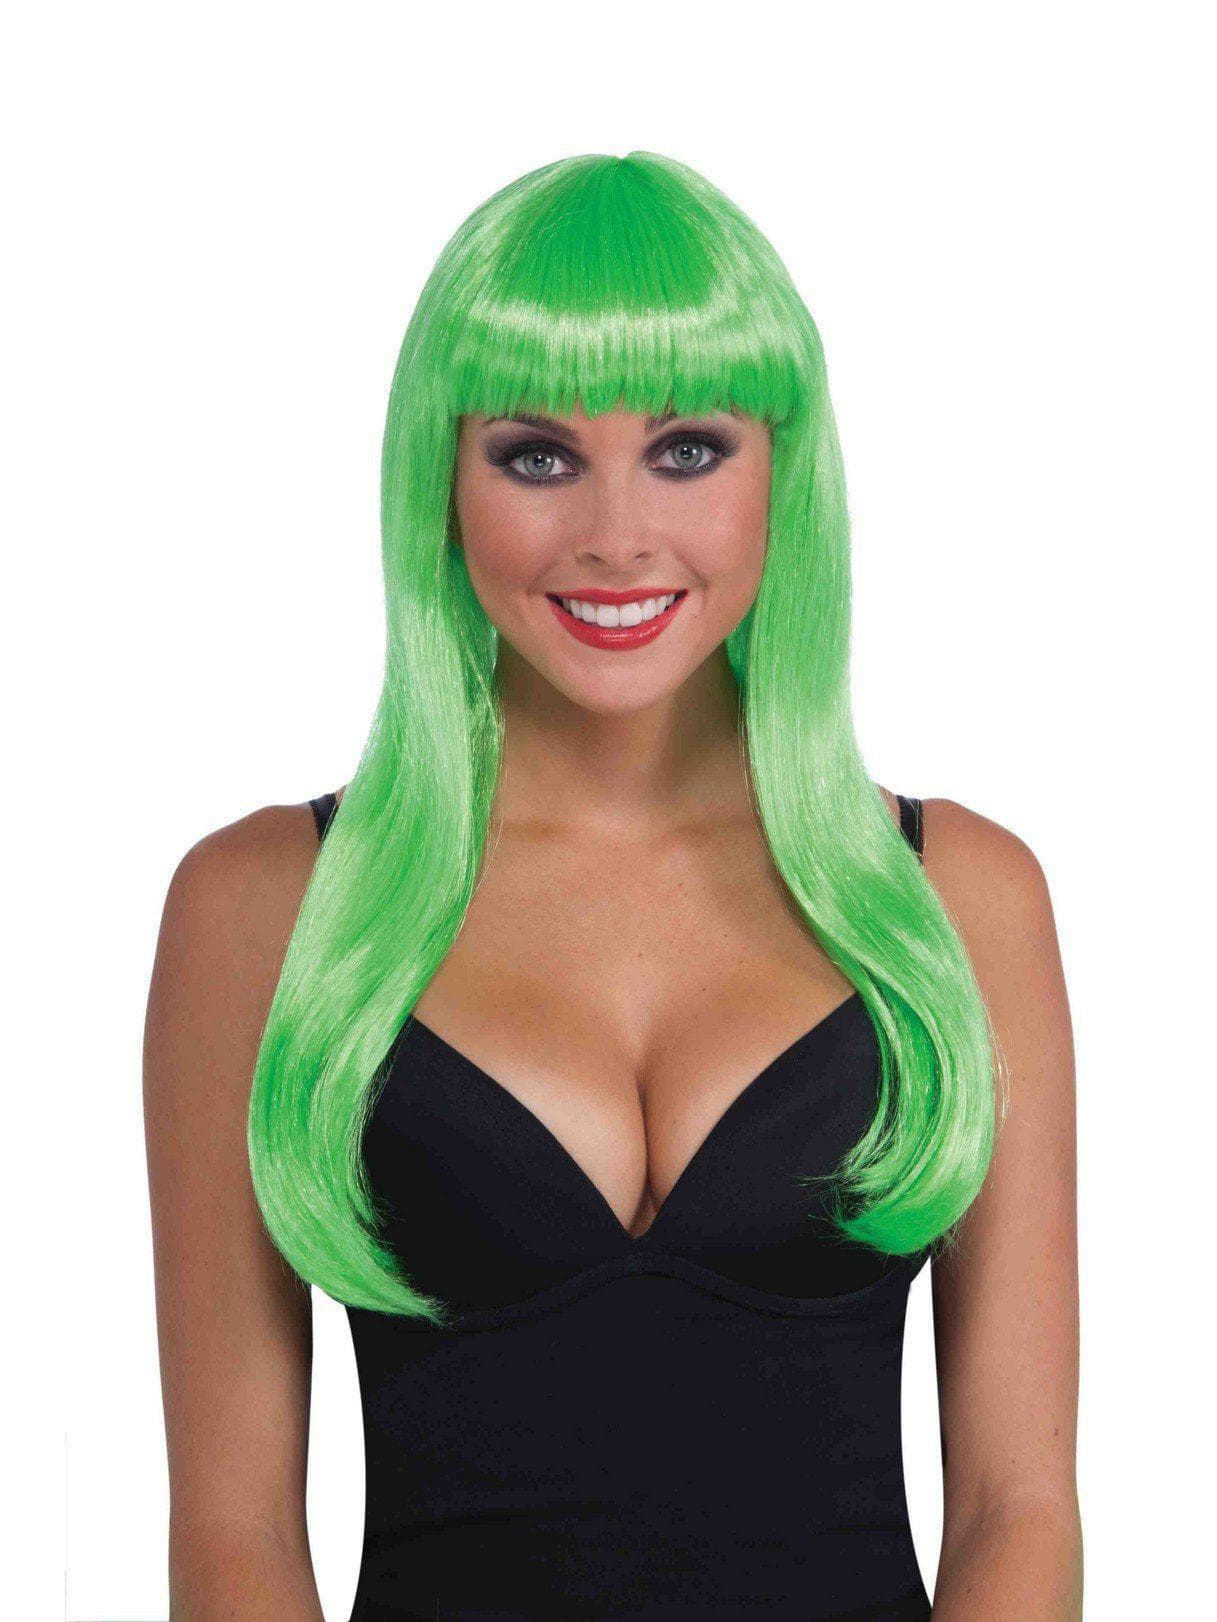 Adult Long Neon Green Wig with Bangs - costumes.com